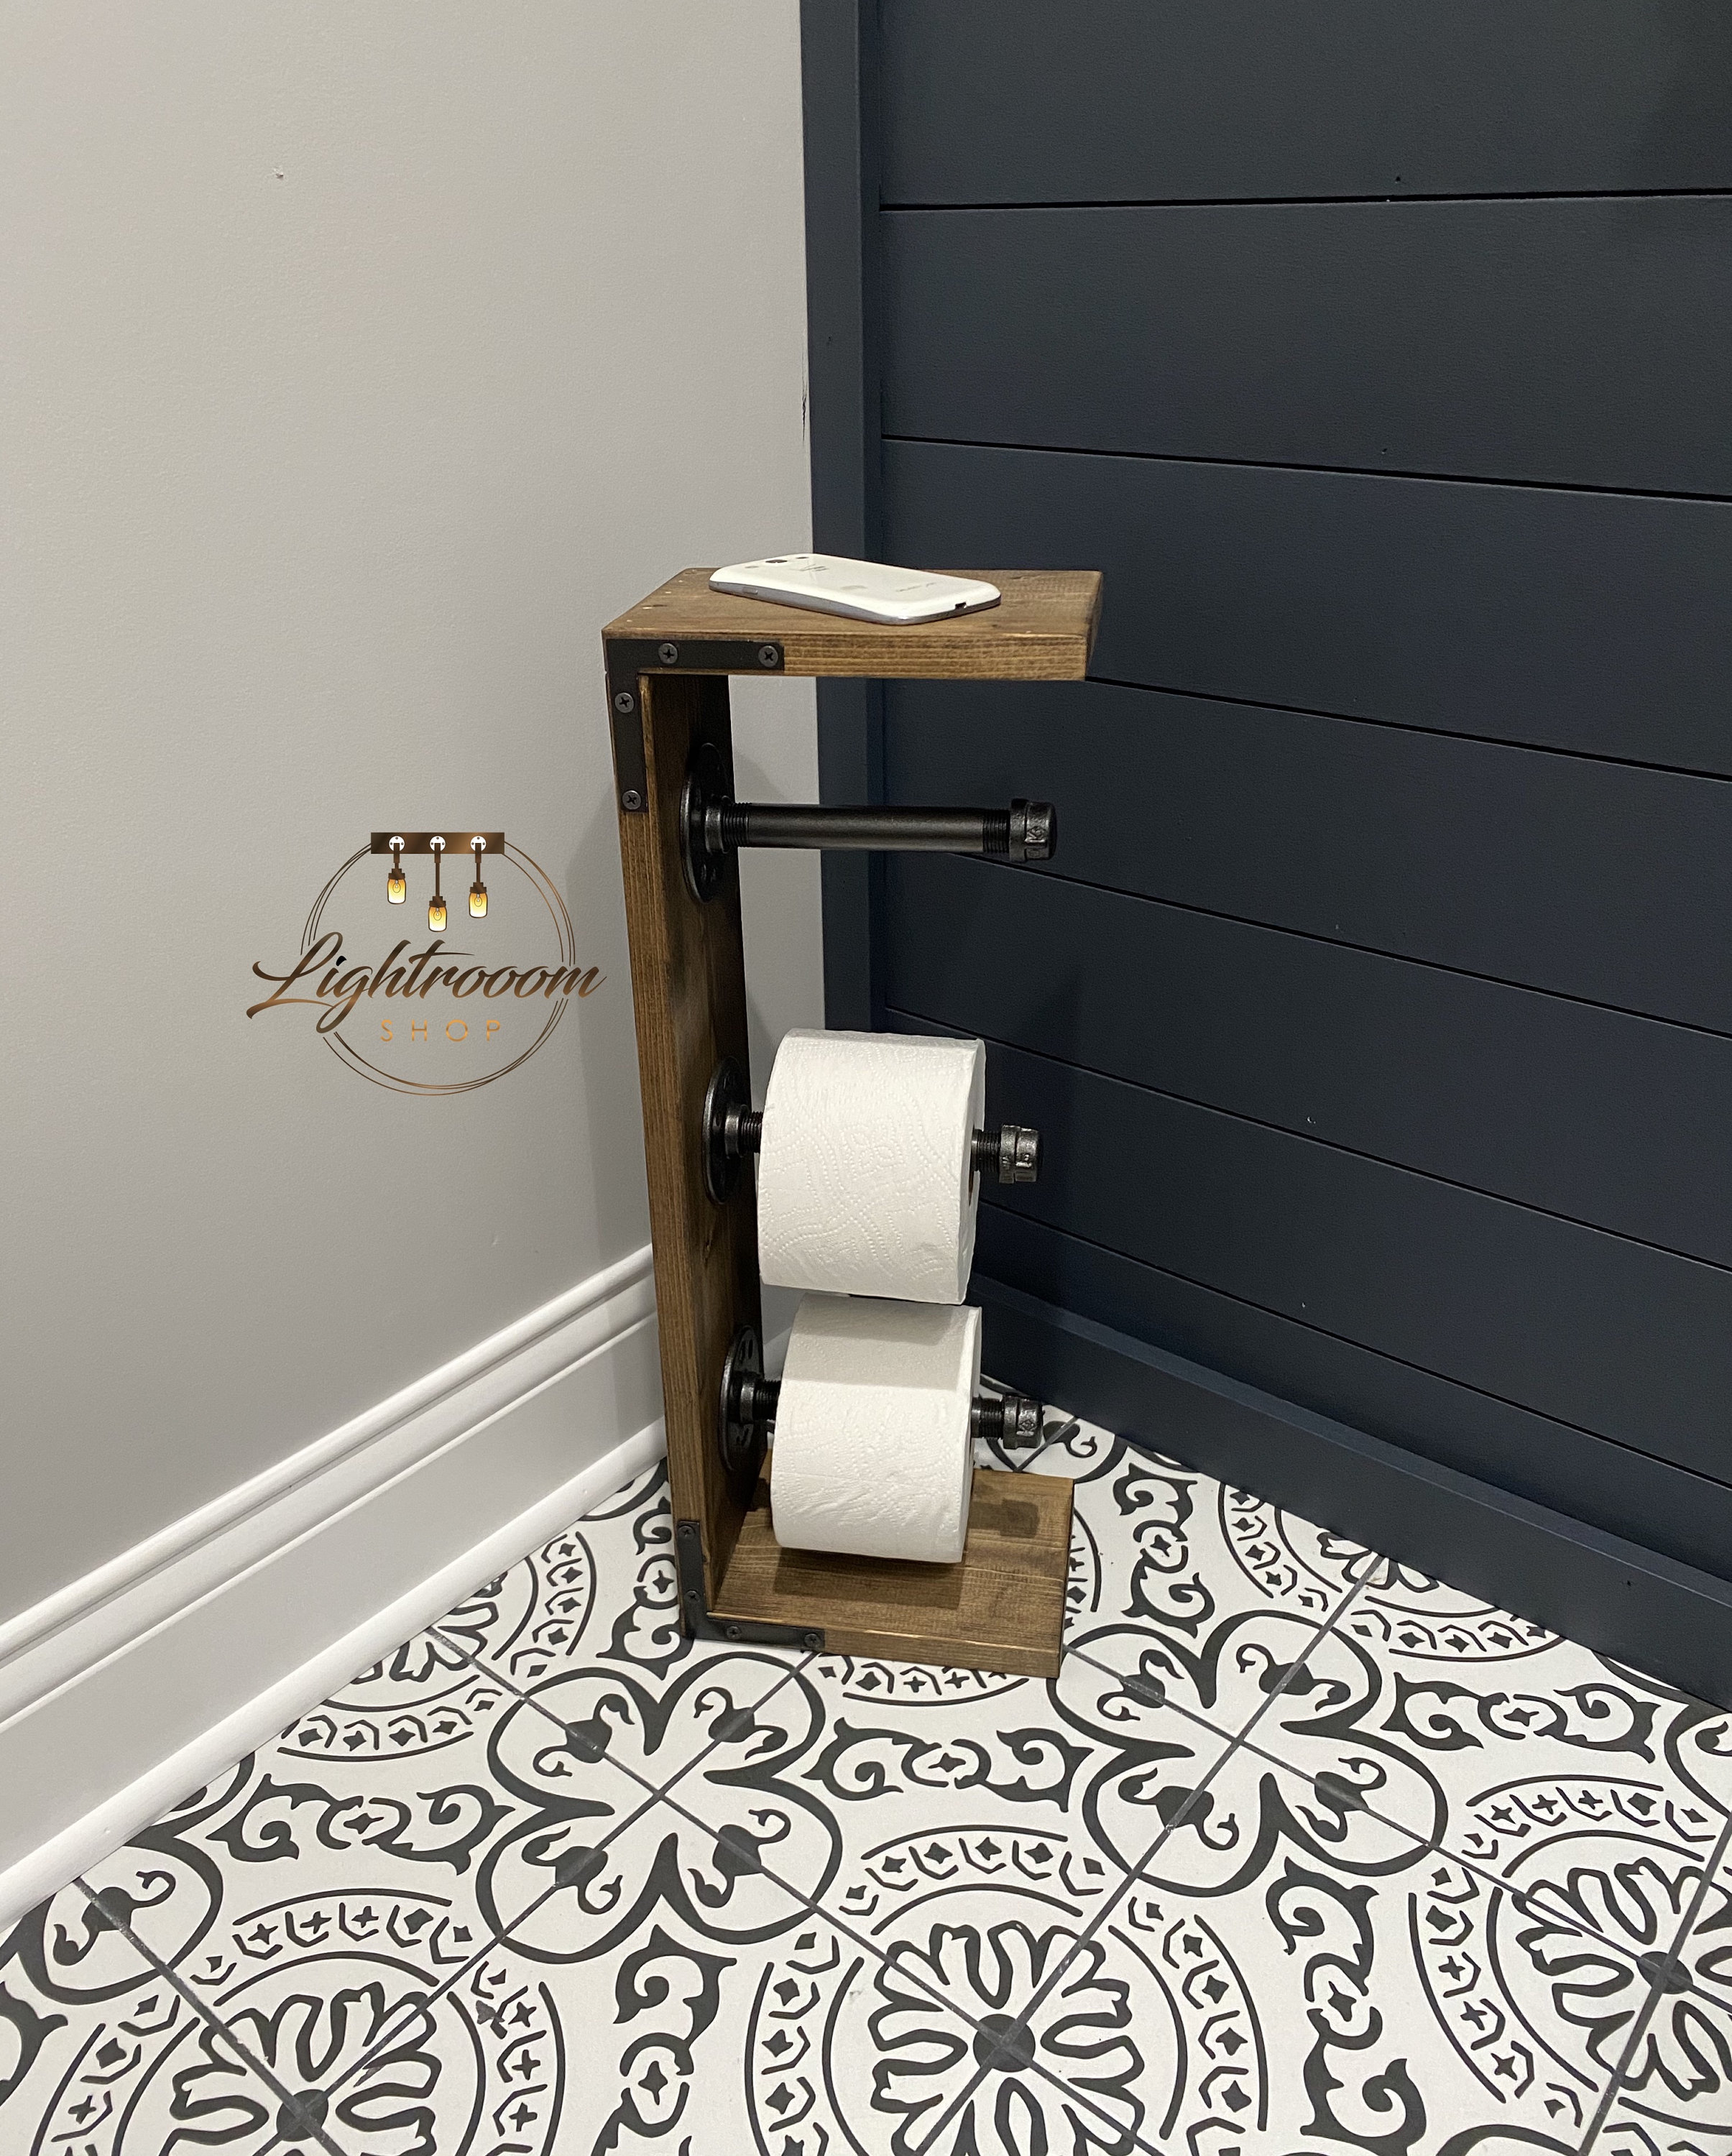 Toilet Paper Stand With Extra 2 Roll Storage, Floor Stand TP Holder, Paper  Dispenser, Rustic Industrial Galvanized Pipe Toilet Paper Holder 